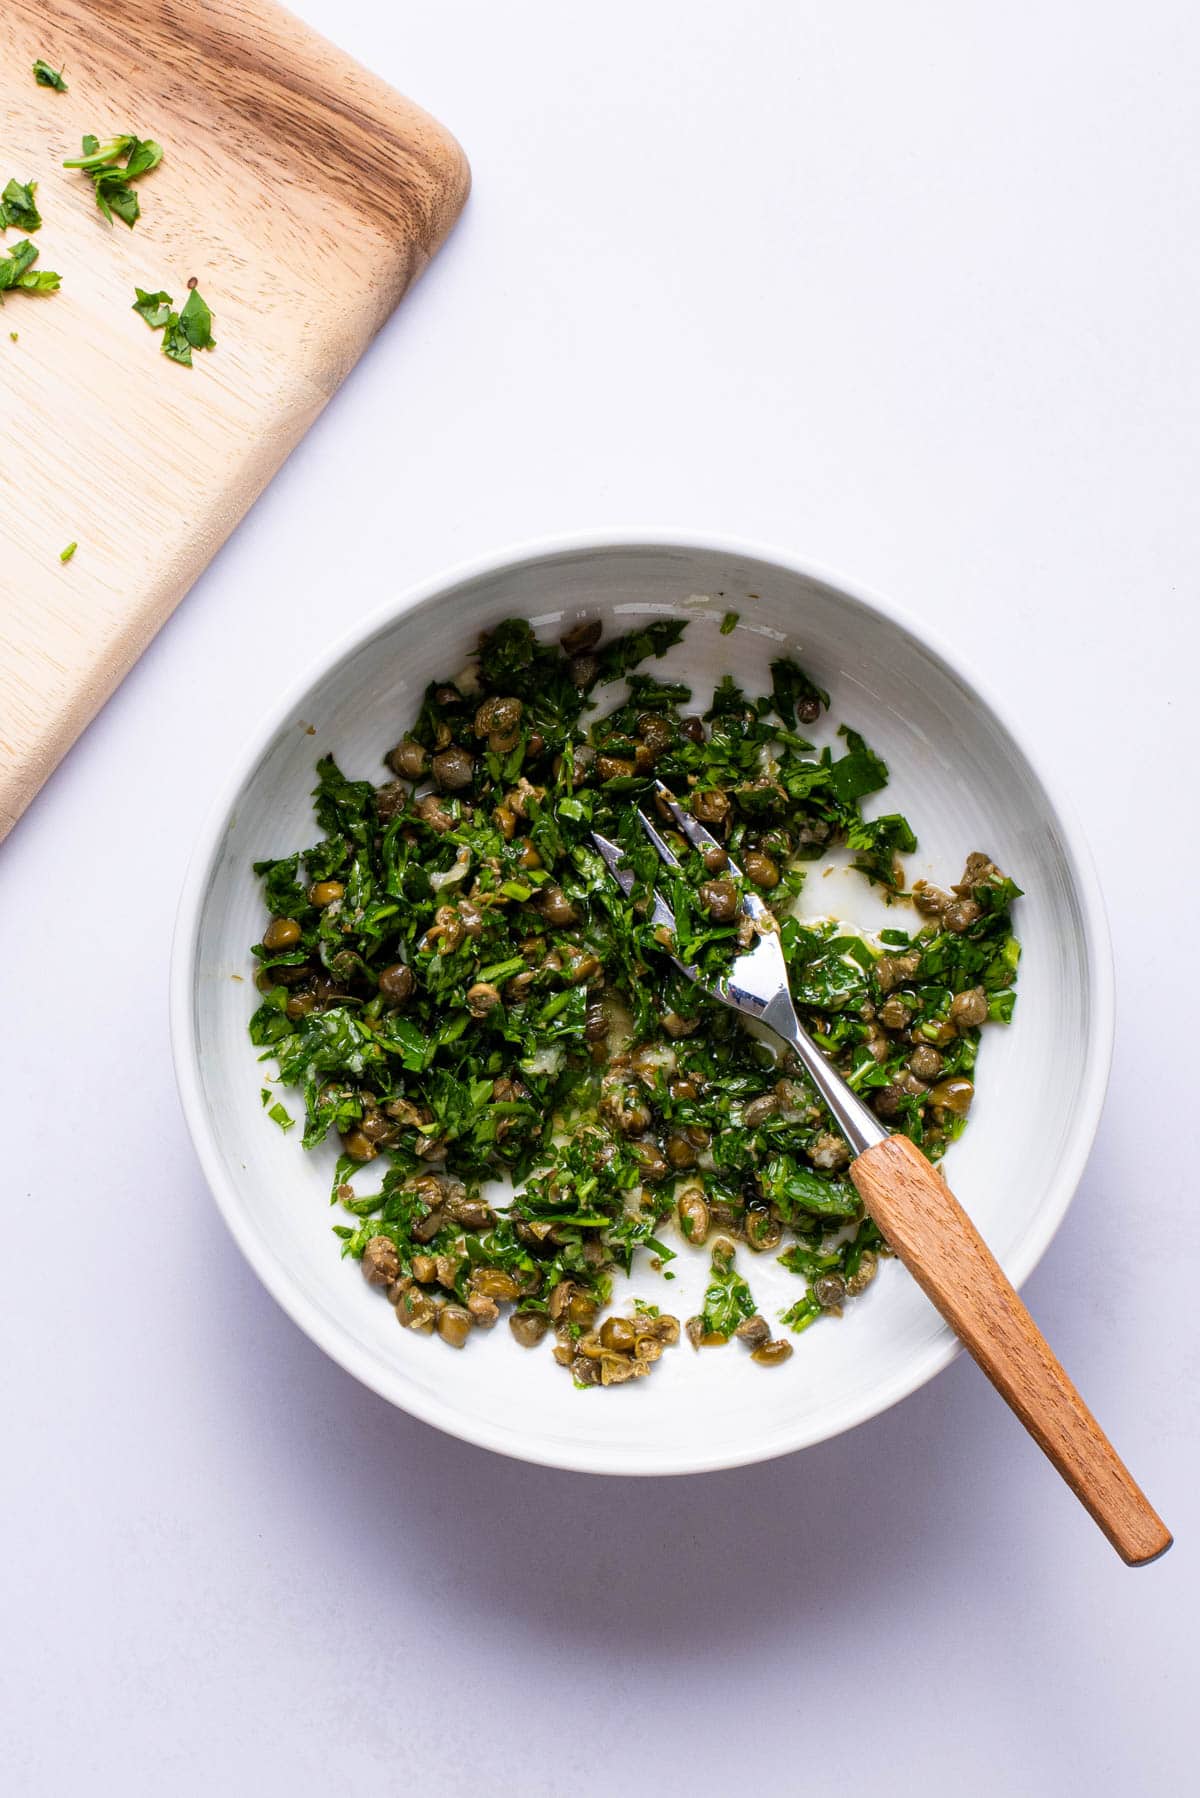 Parsley-caper relish in a bowl.